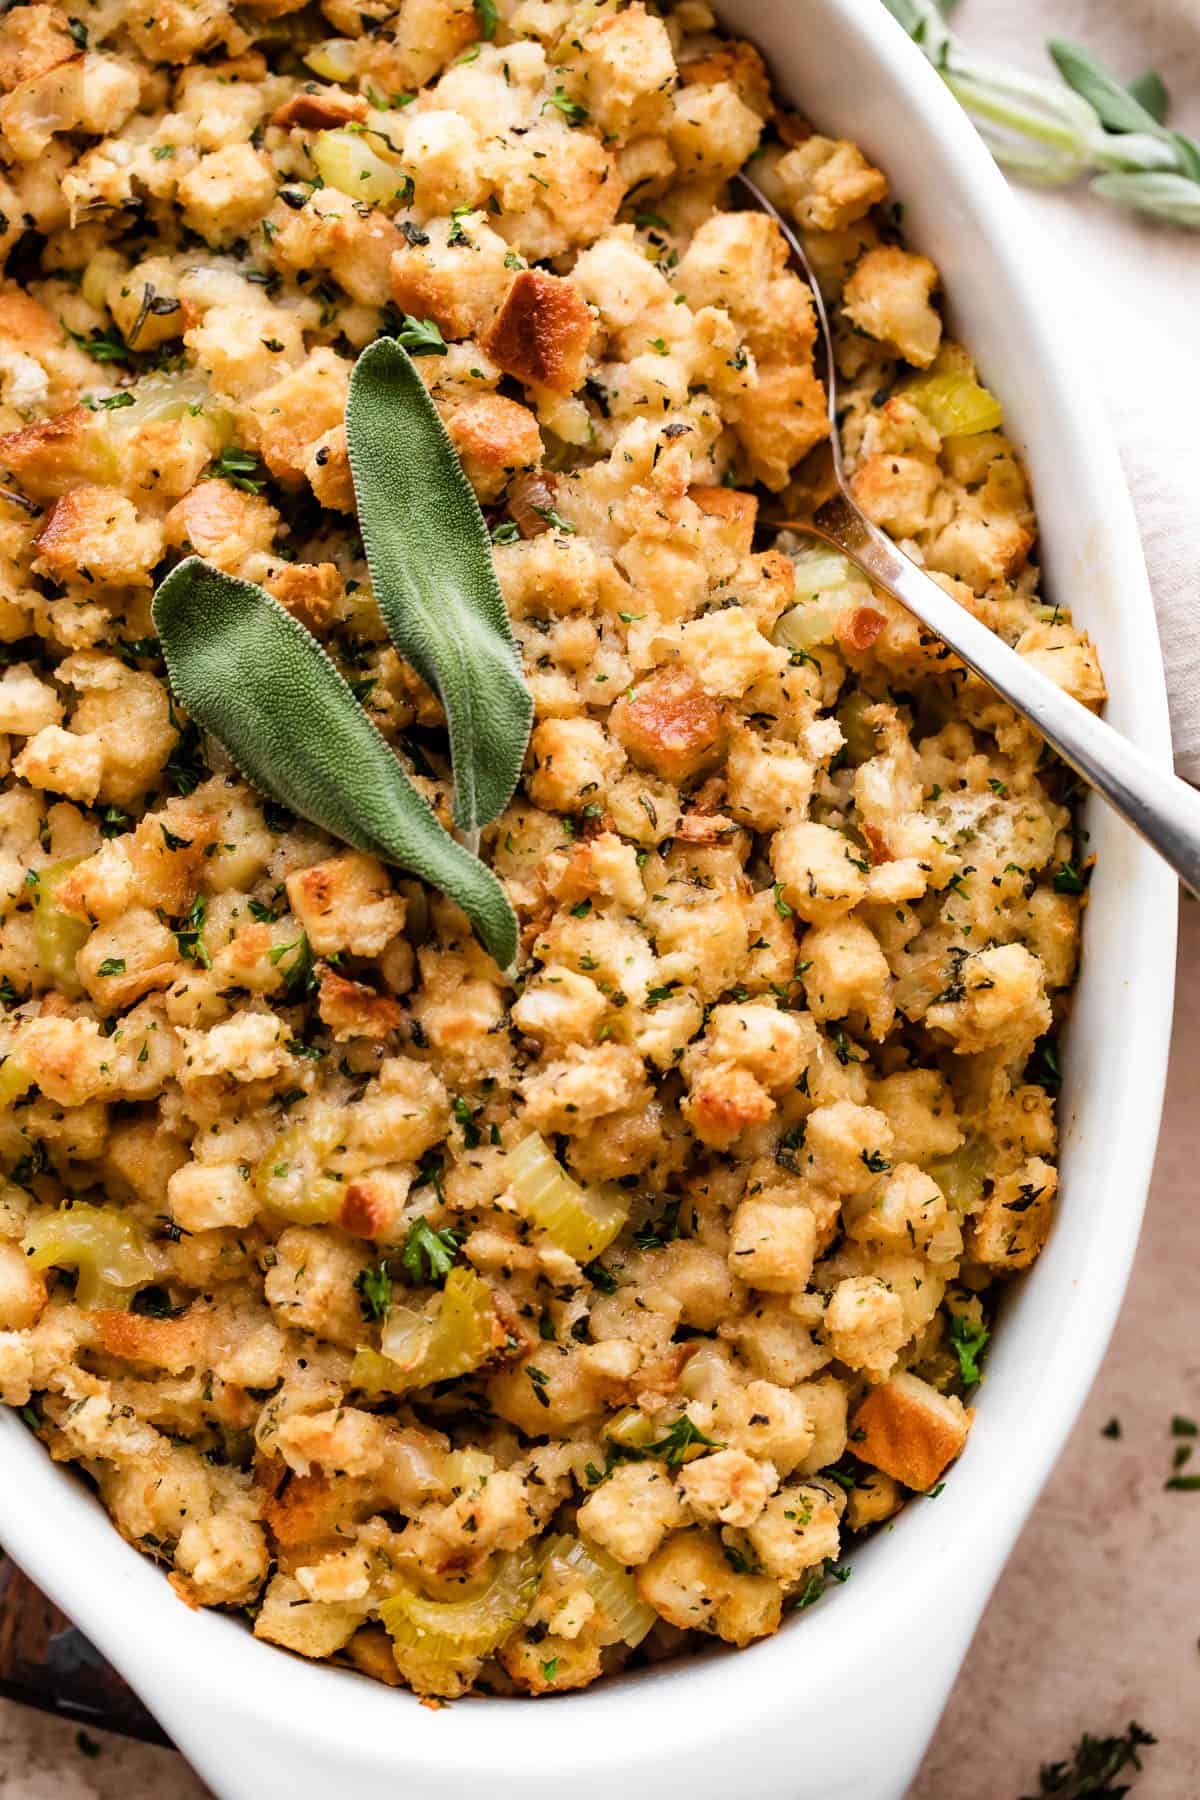 Fresh baked stuffing (dressing) sprinkled with sage leaves and herbs in a white dish.